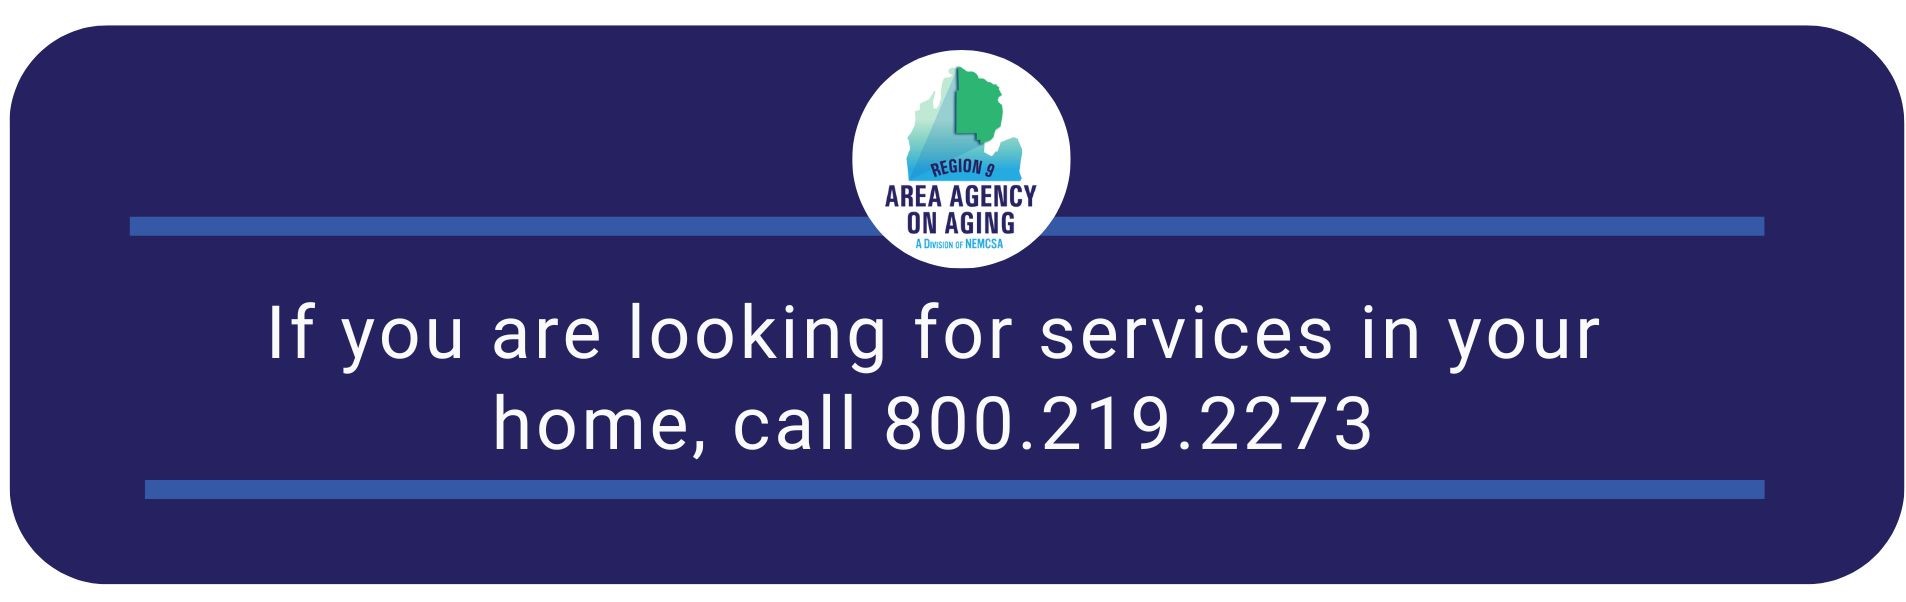 Our logo and If you are looking for services in your home, call 800-219-2273